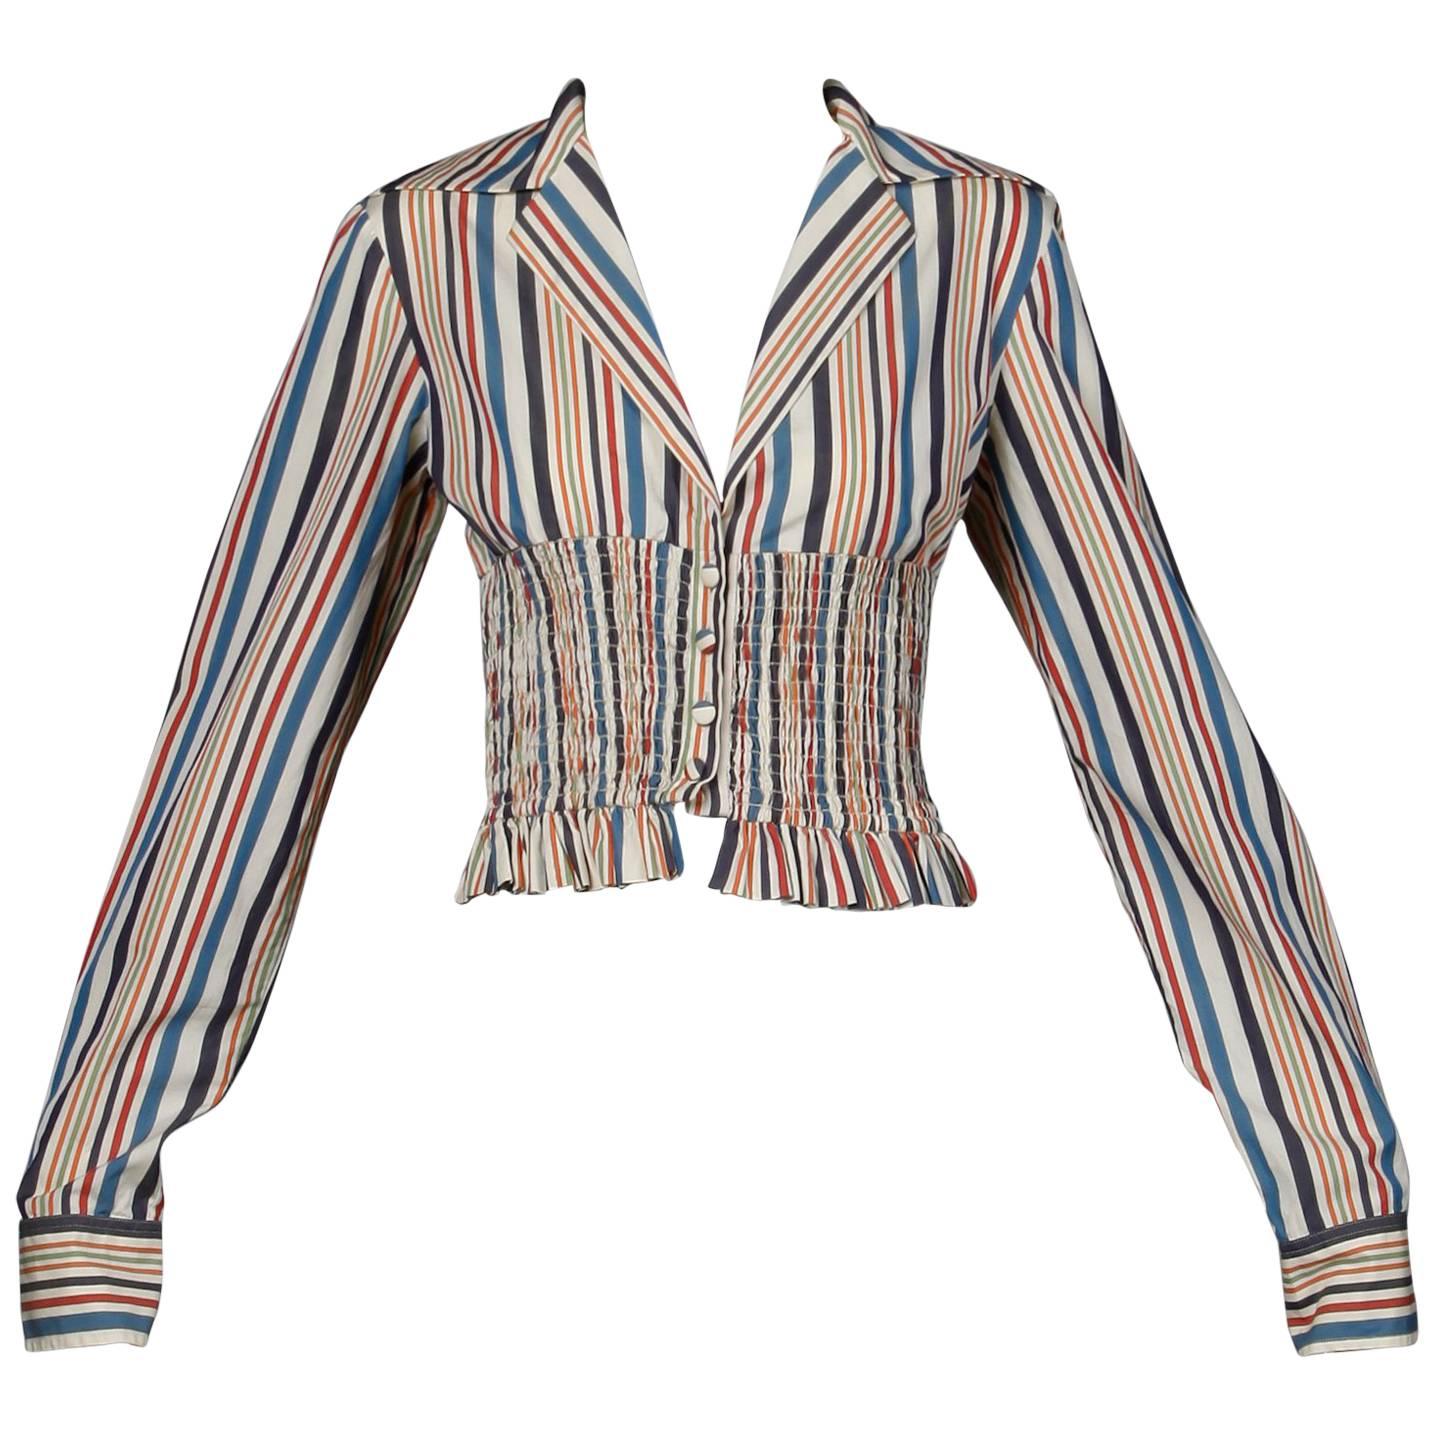 Romeo Gigli Vintage Striped Cotton Button Up Blouse, Shirt or Jacket